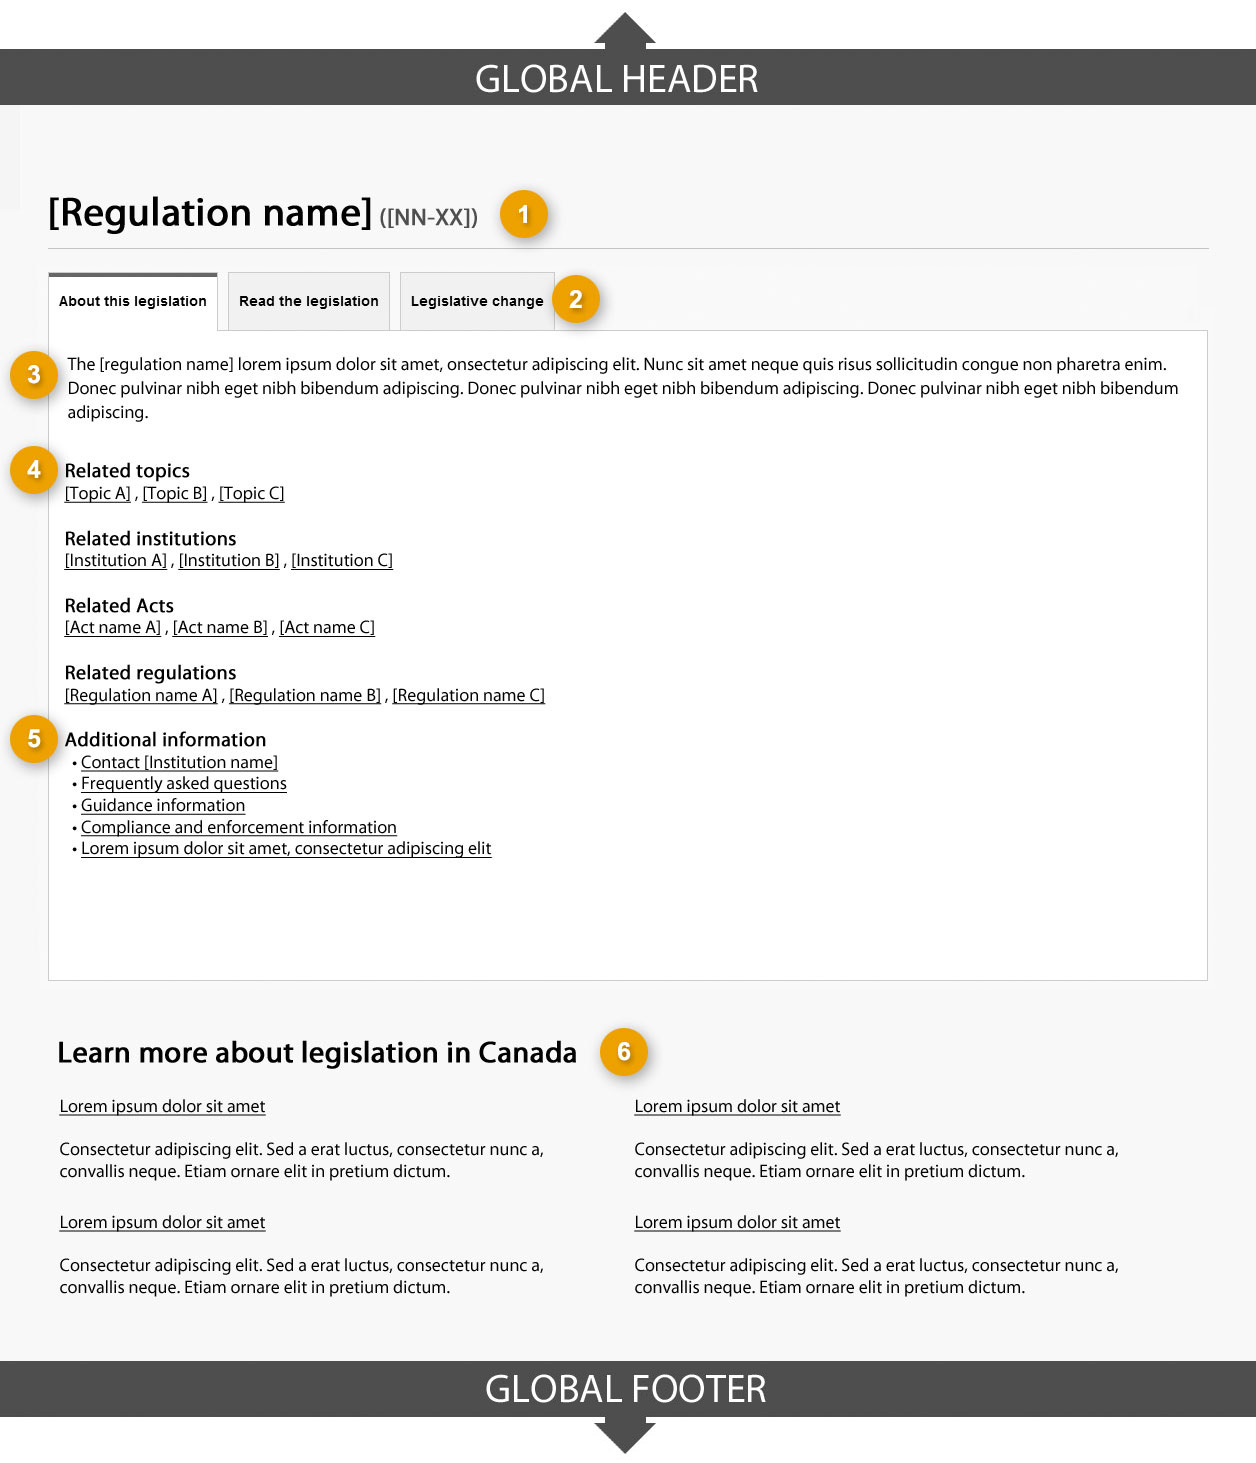 Template of regulation profile page showing the “About the legislation” tab. Read top to bottom and left to right. Specifications detailed below.